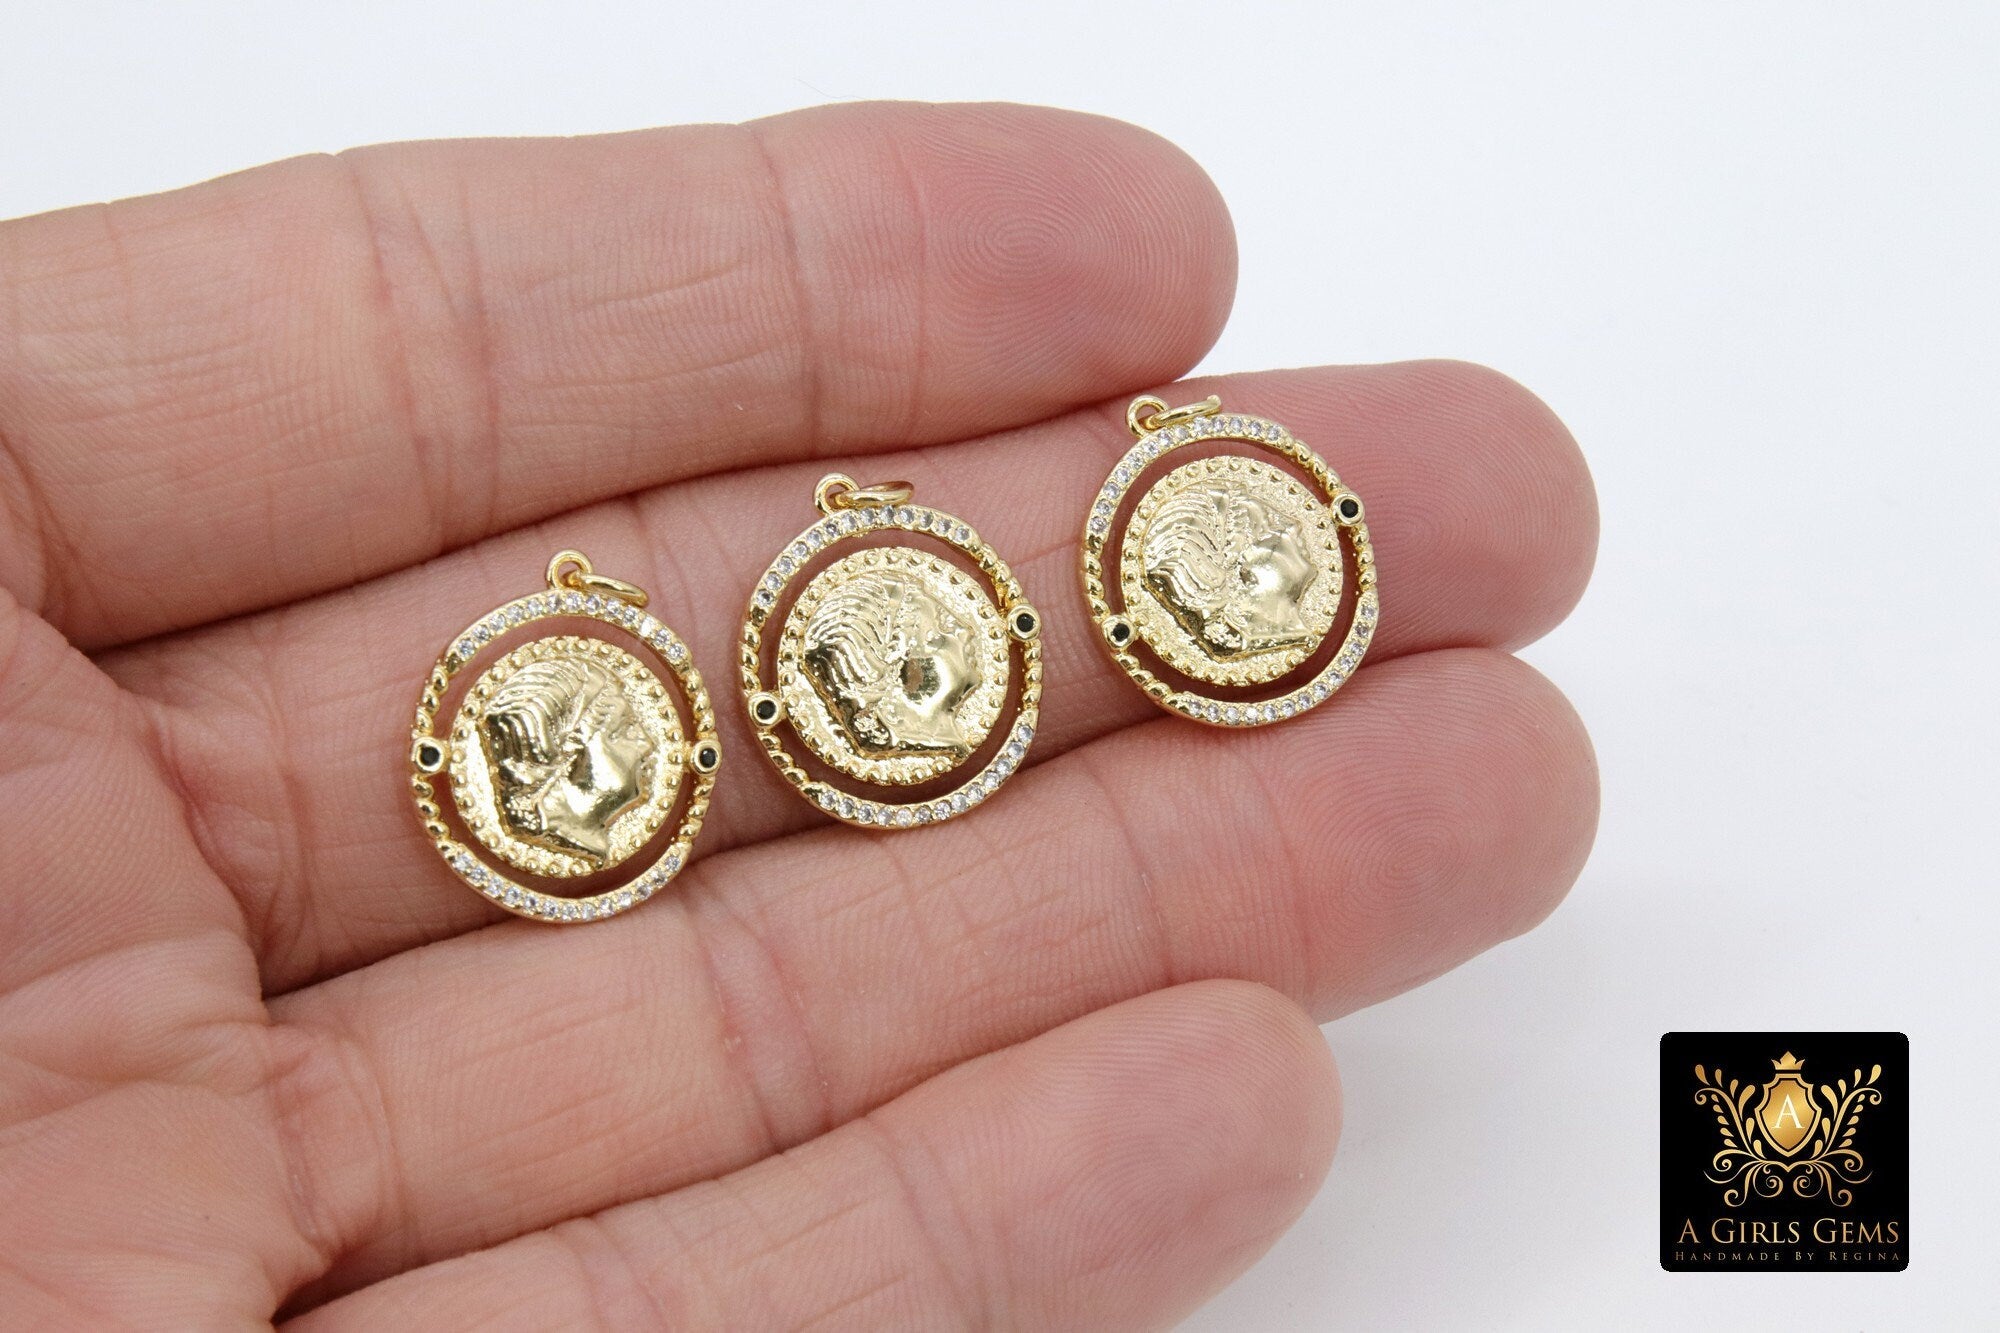 Gold Coin Charm, 4 Styles CZ Pave Round Disc Charms #2655, Athena Owl